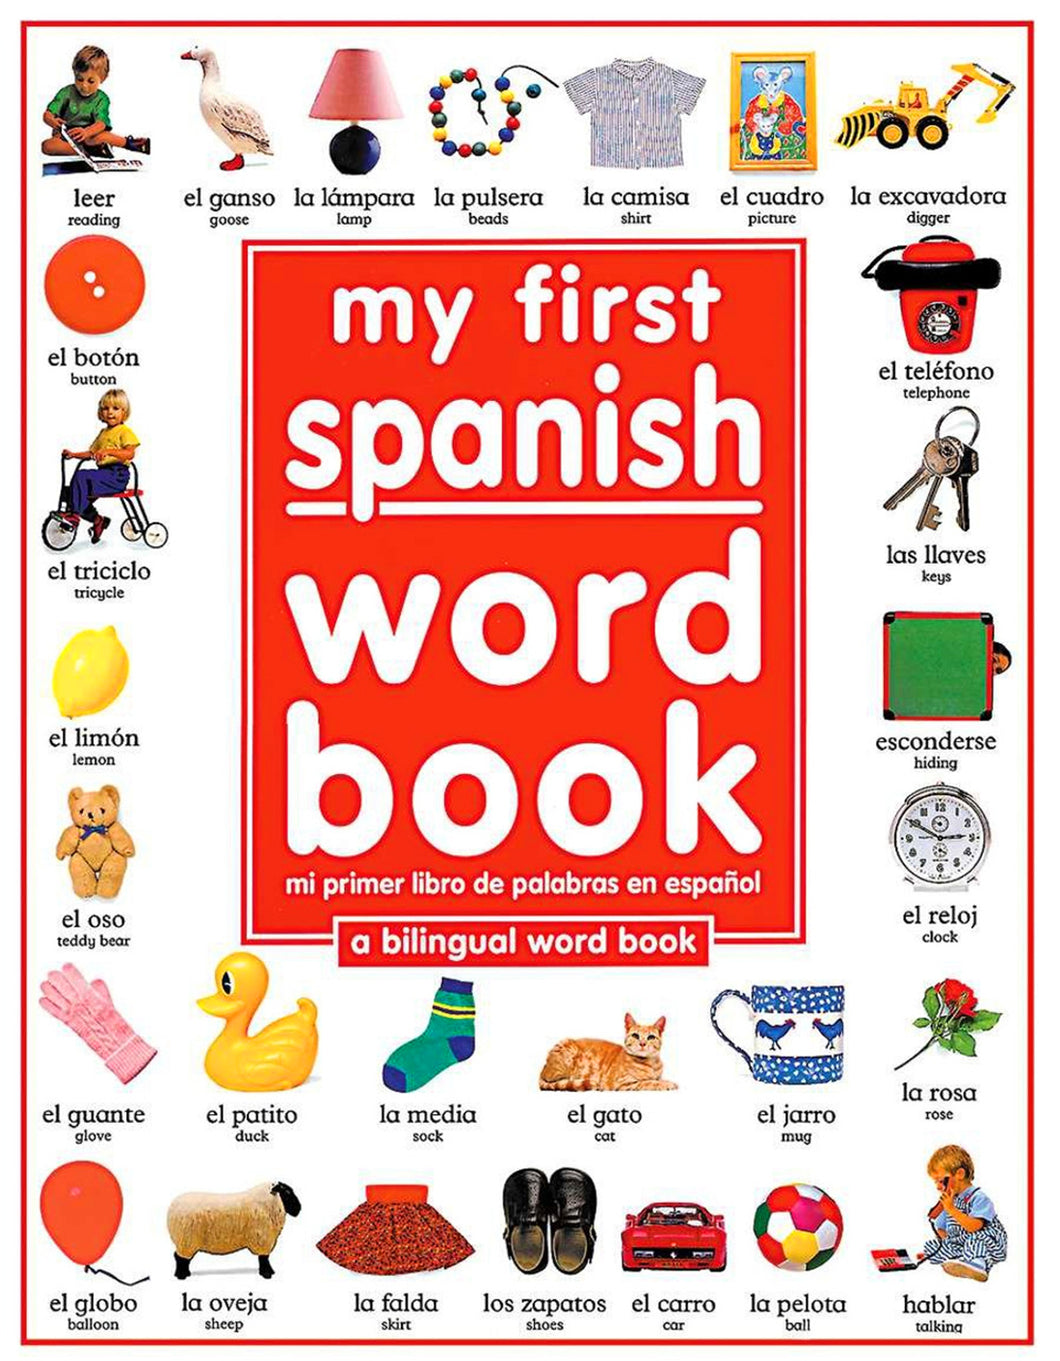 My First Spanish Word Book by DK / Hardcover - NEW BOOK (Bilingual - English + Spanish)